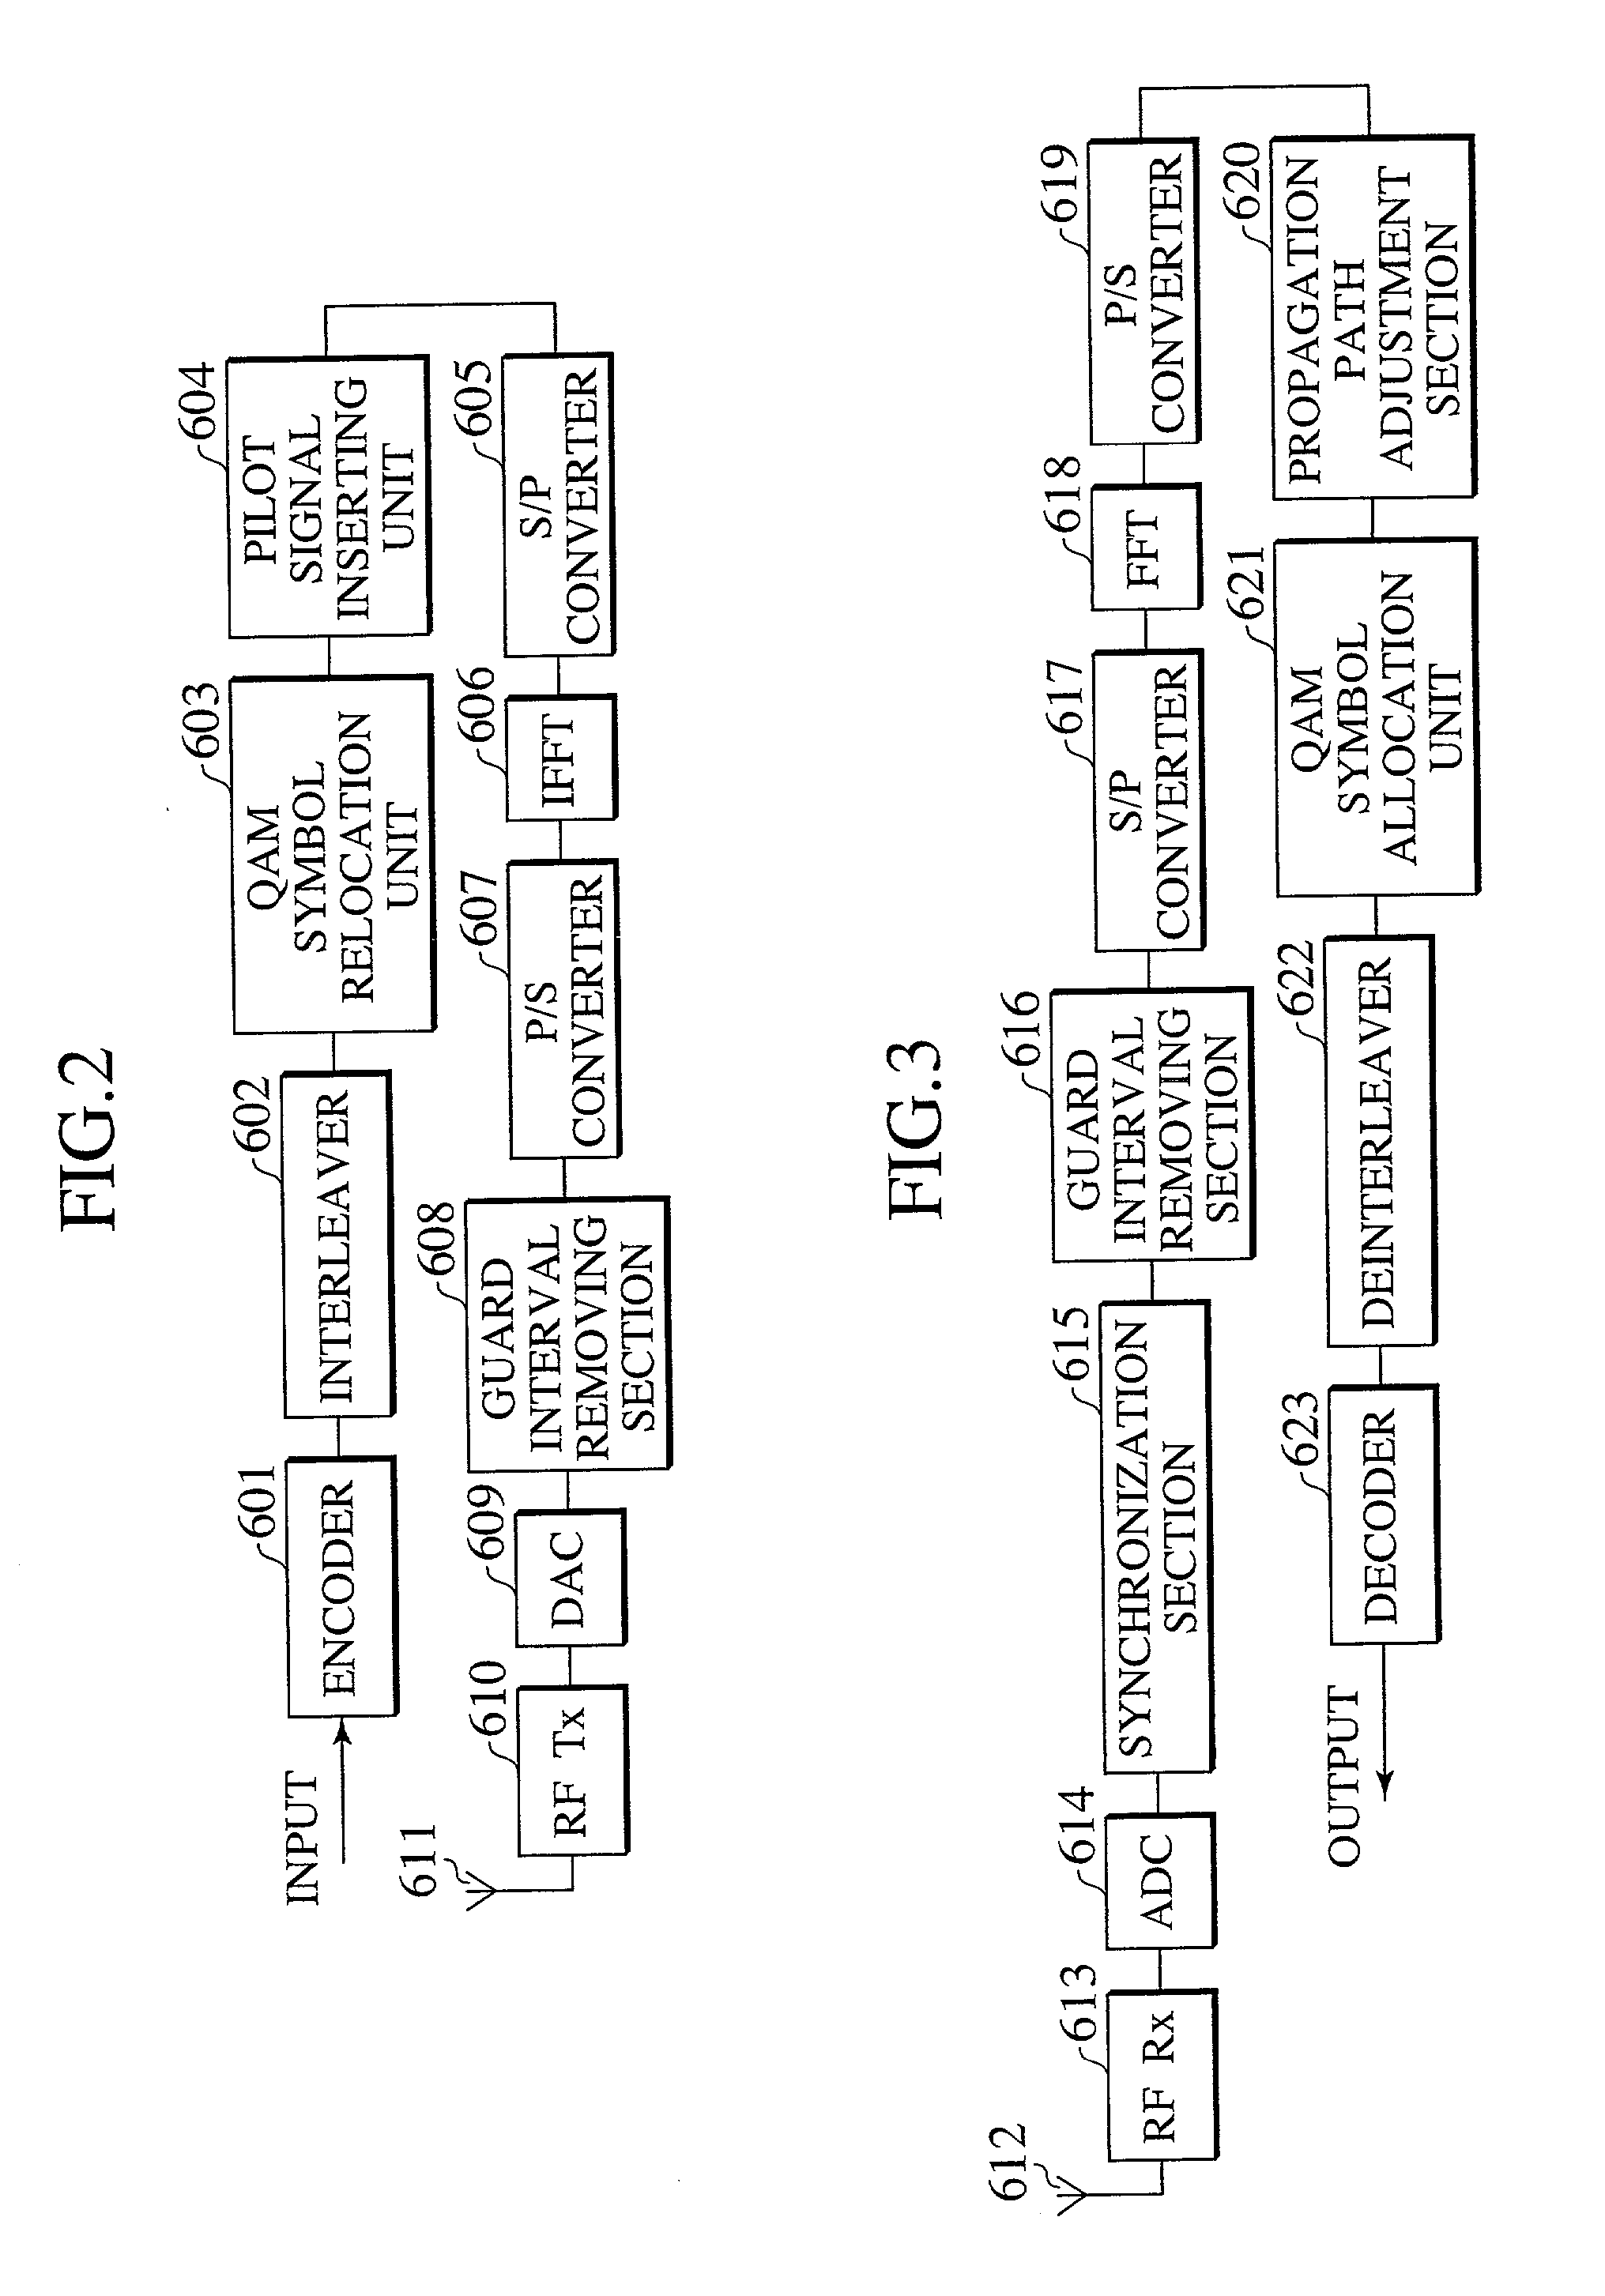 Use of smart antenna in beam formation circuit